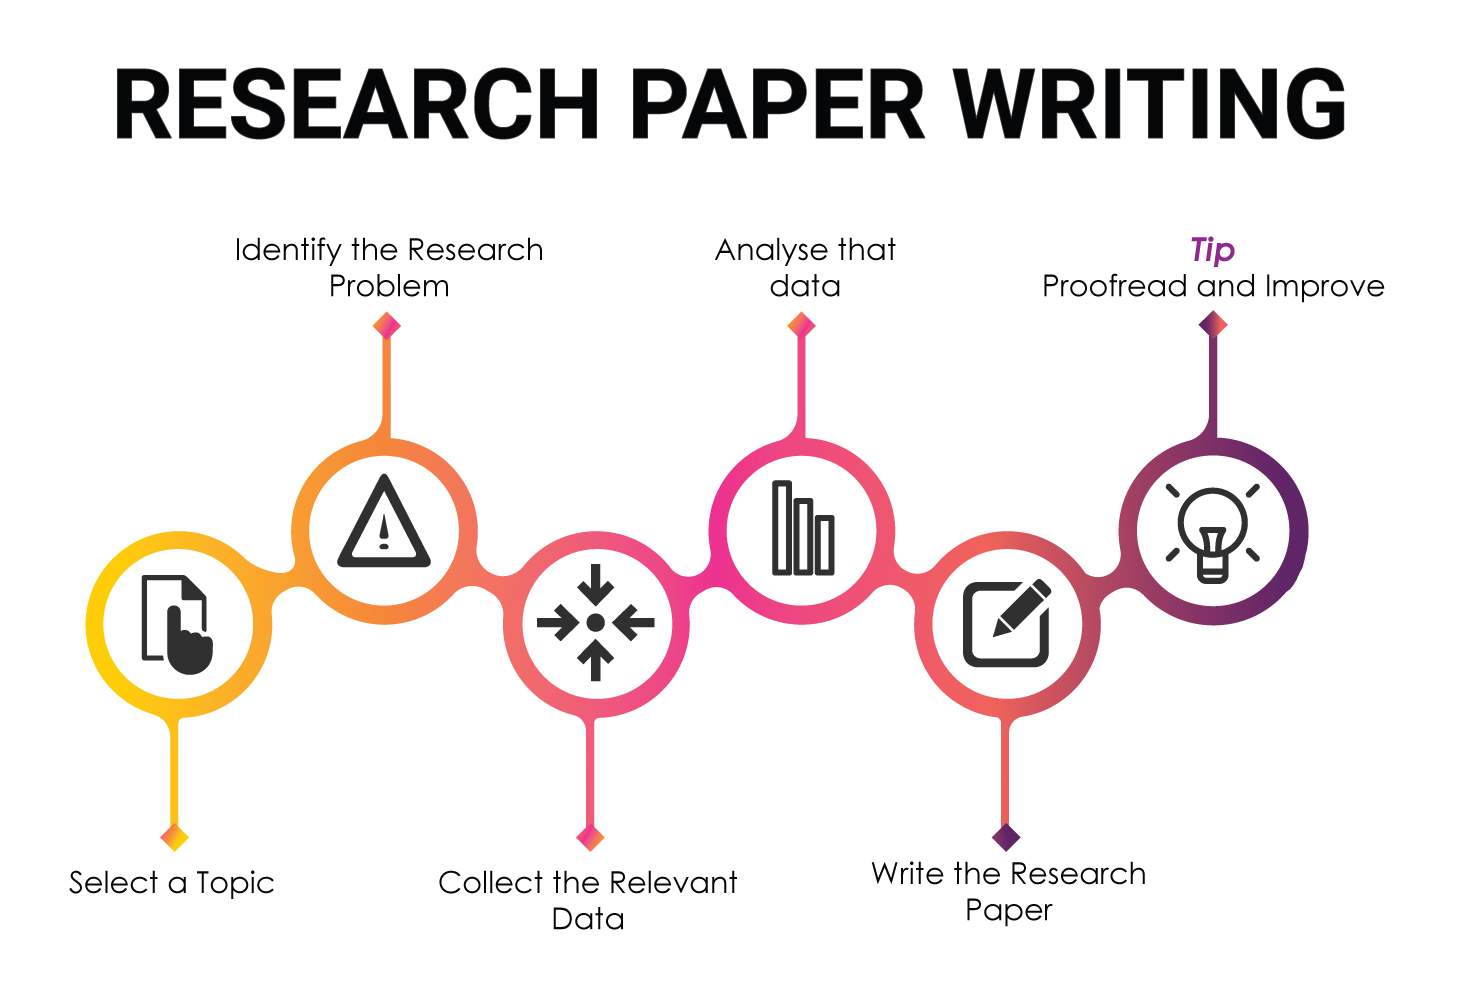 read the jumbled steps in writing a research paper